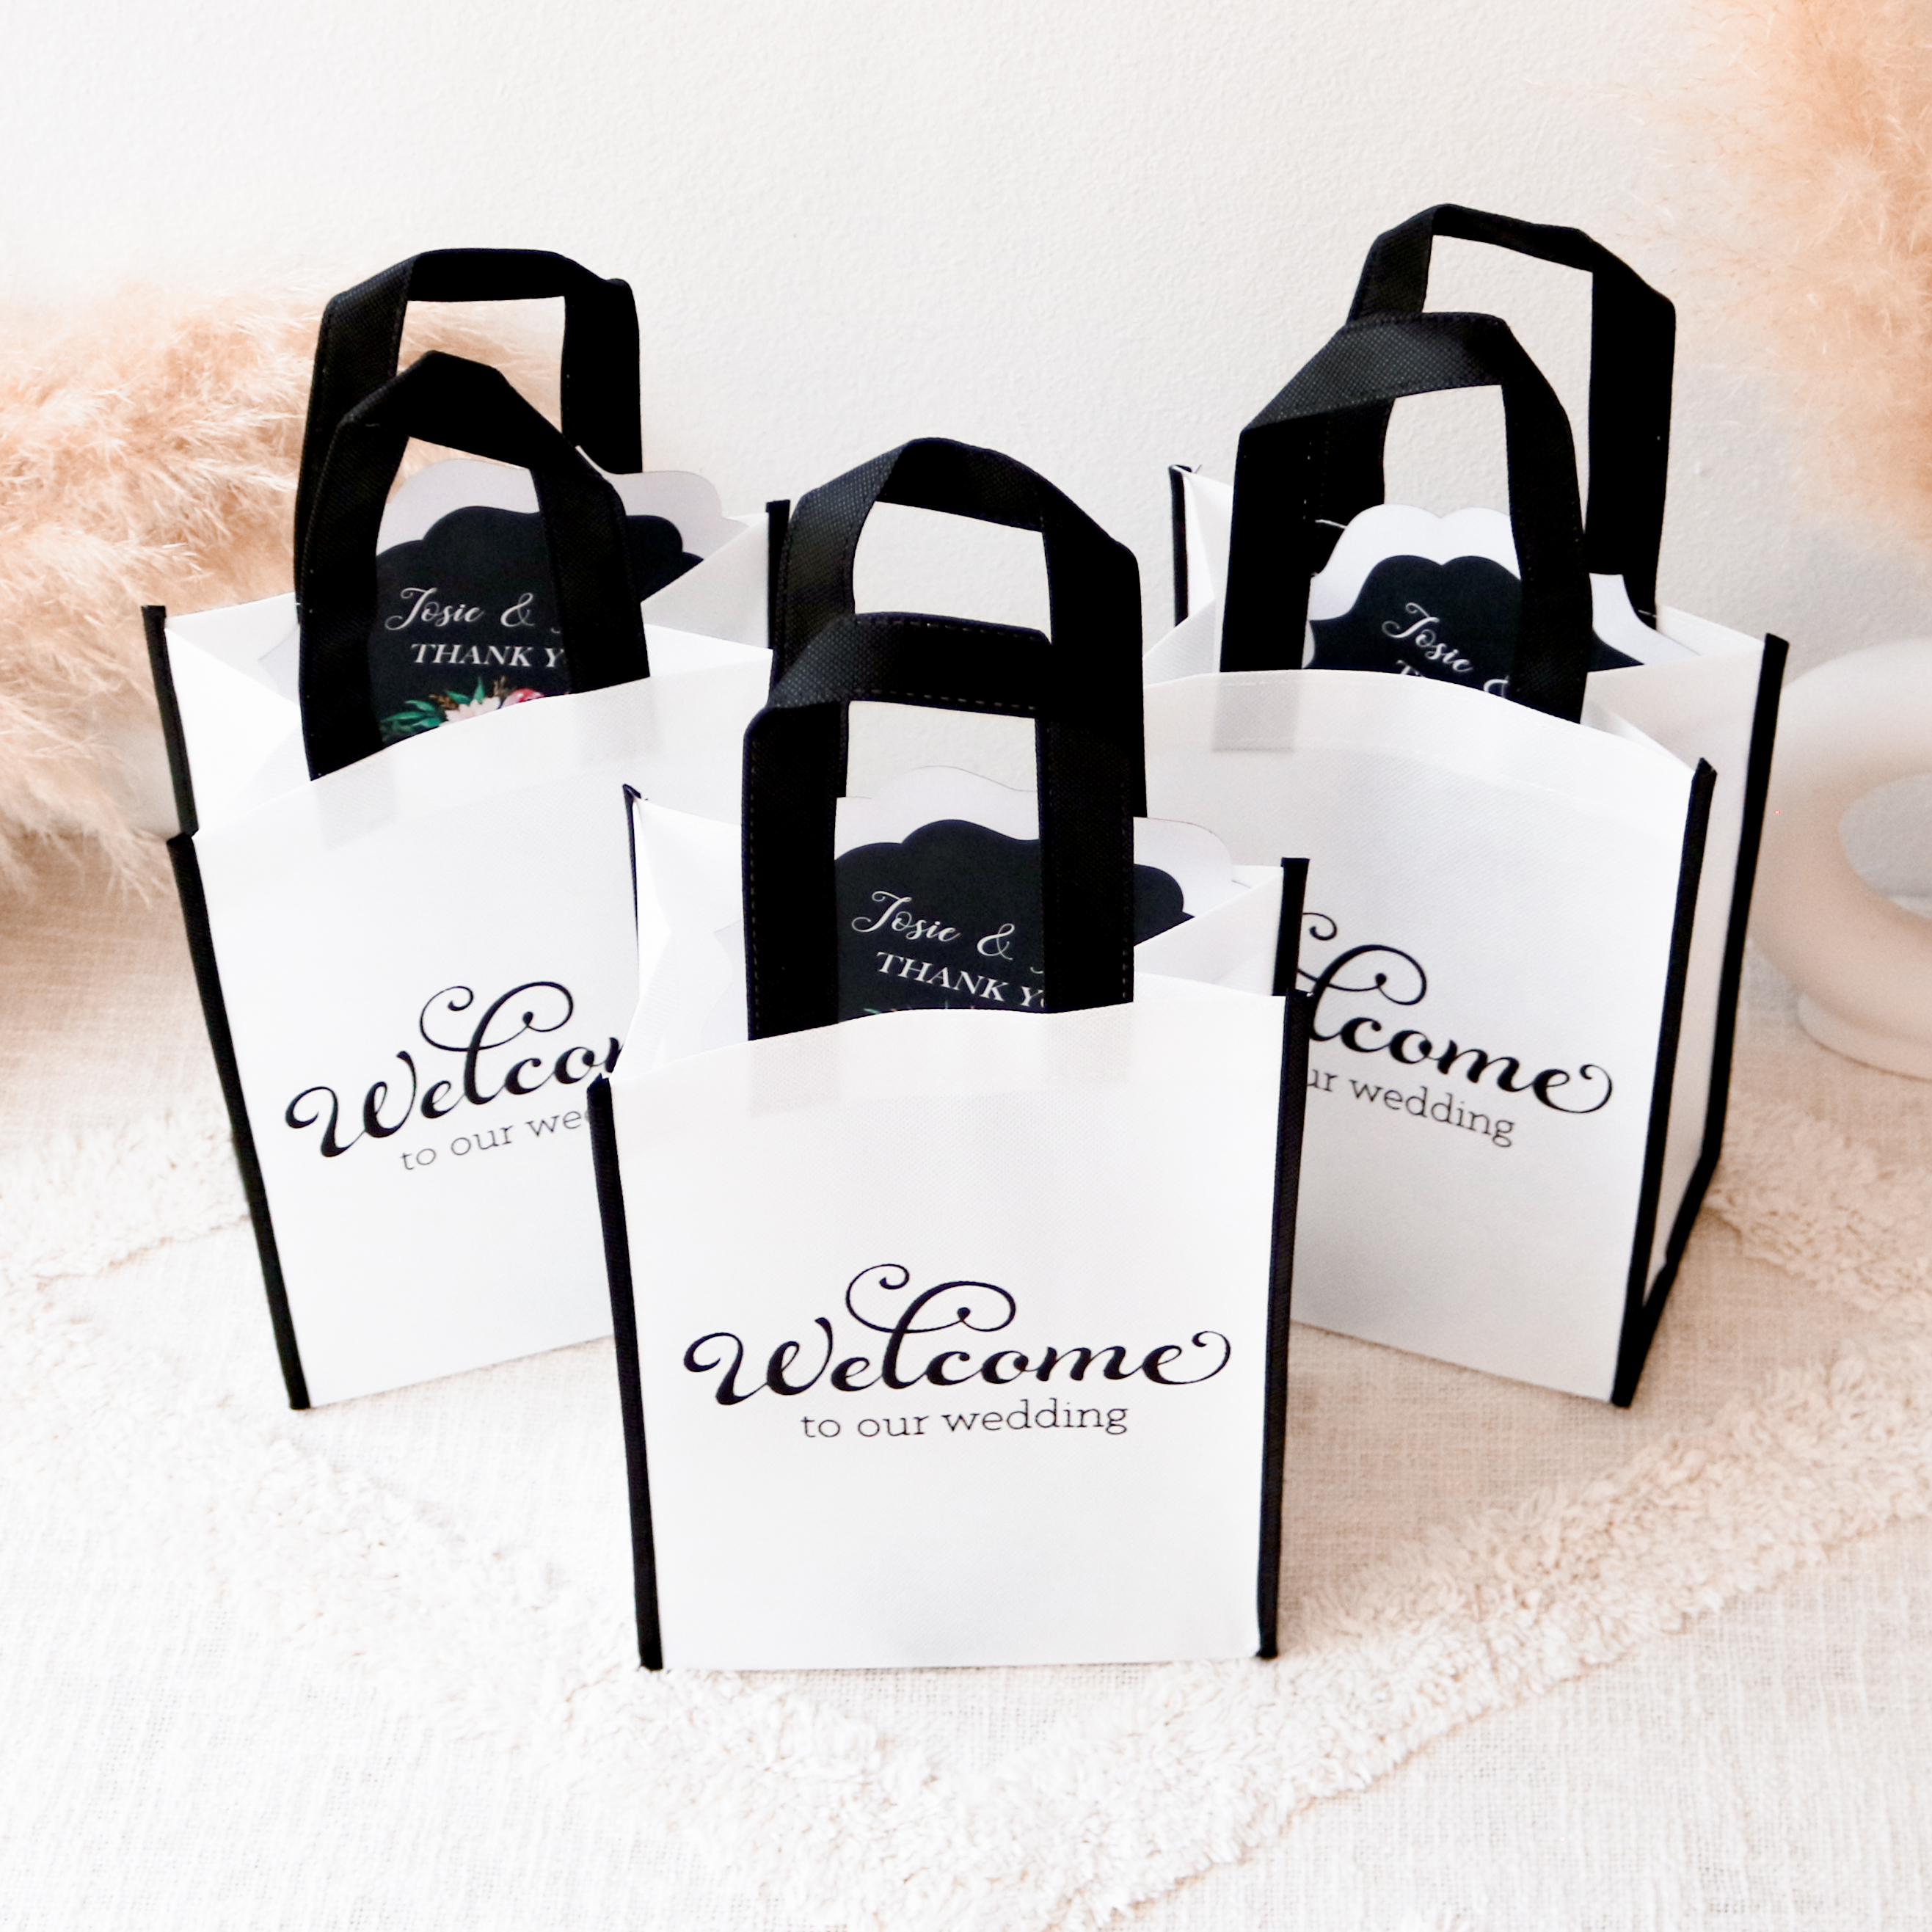 wedding bags for guests